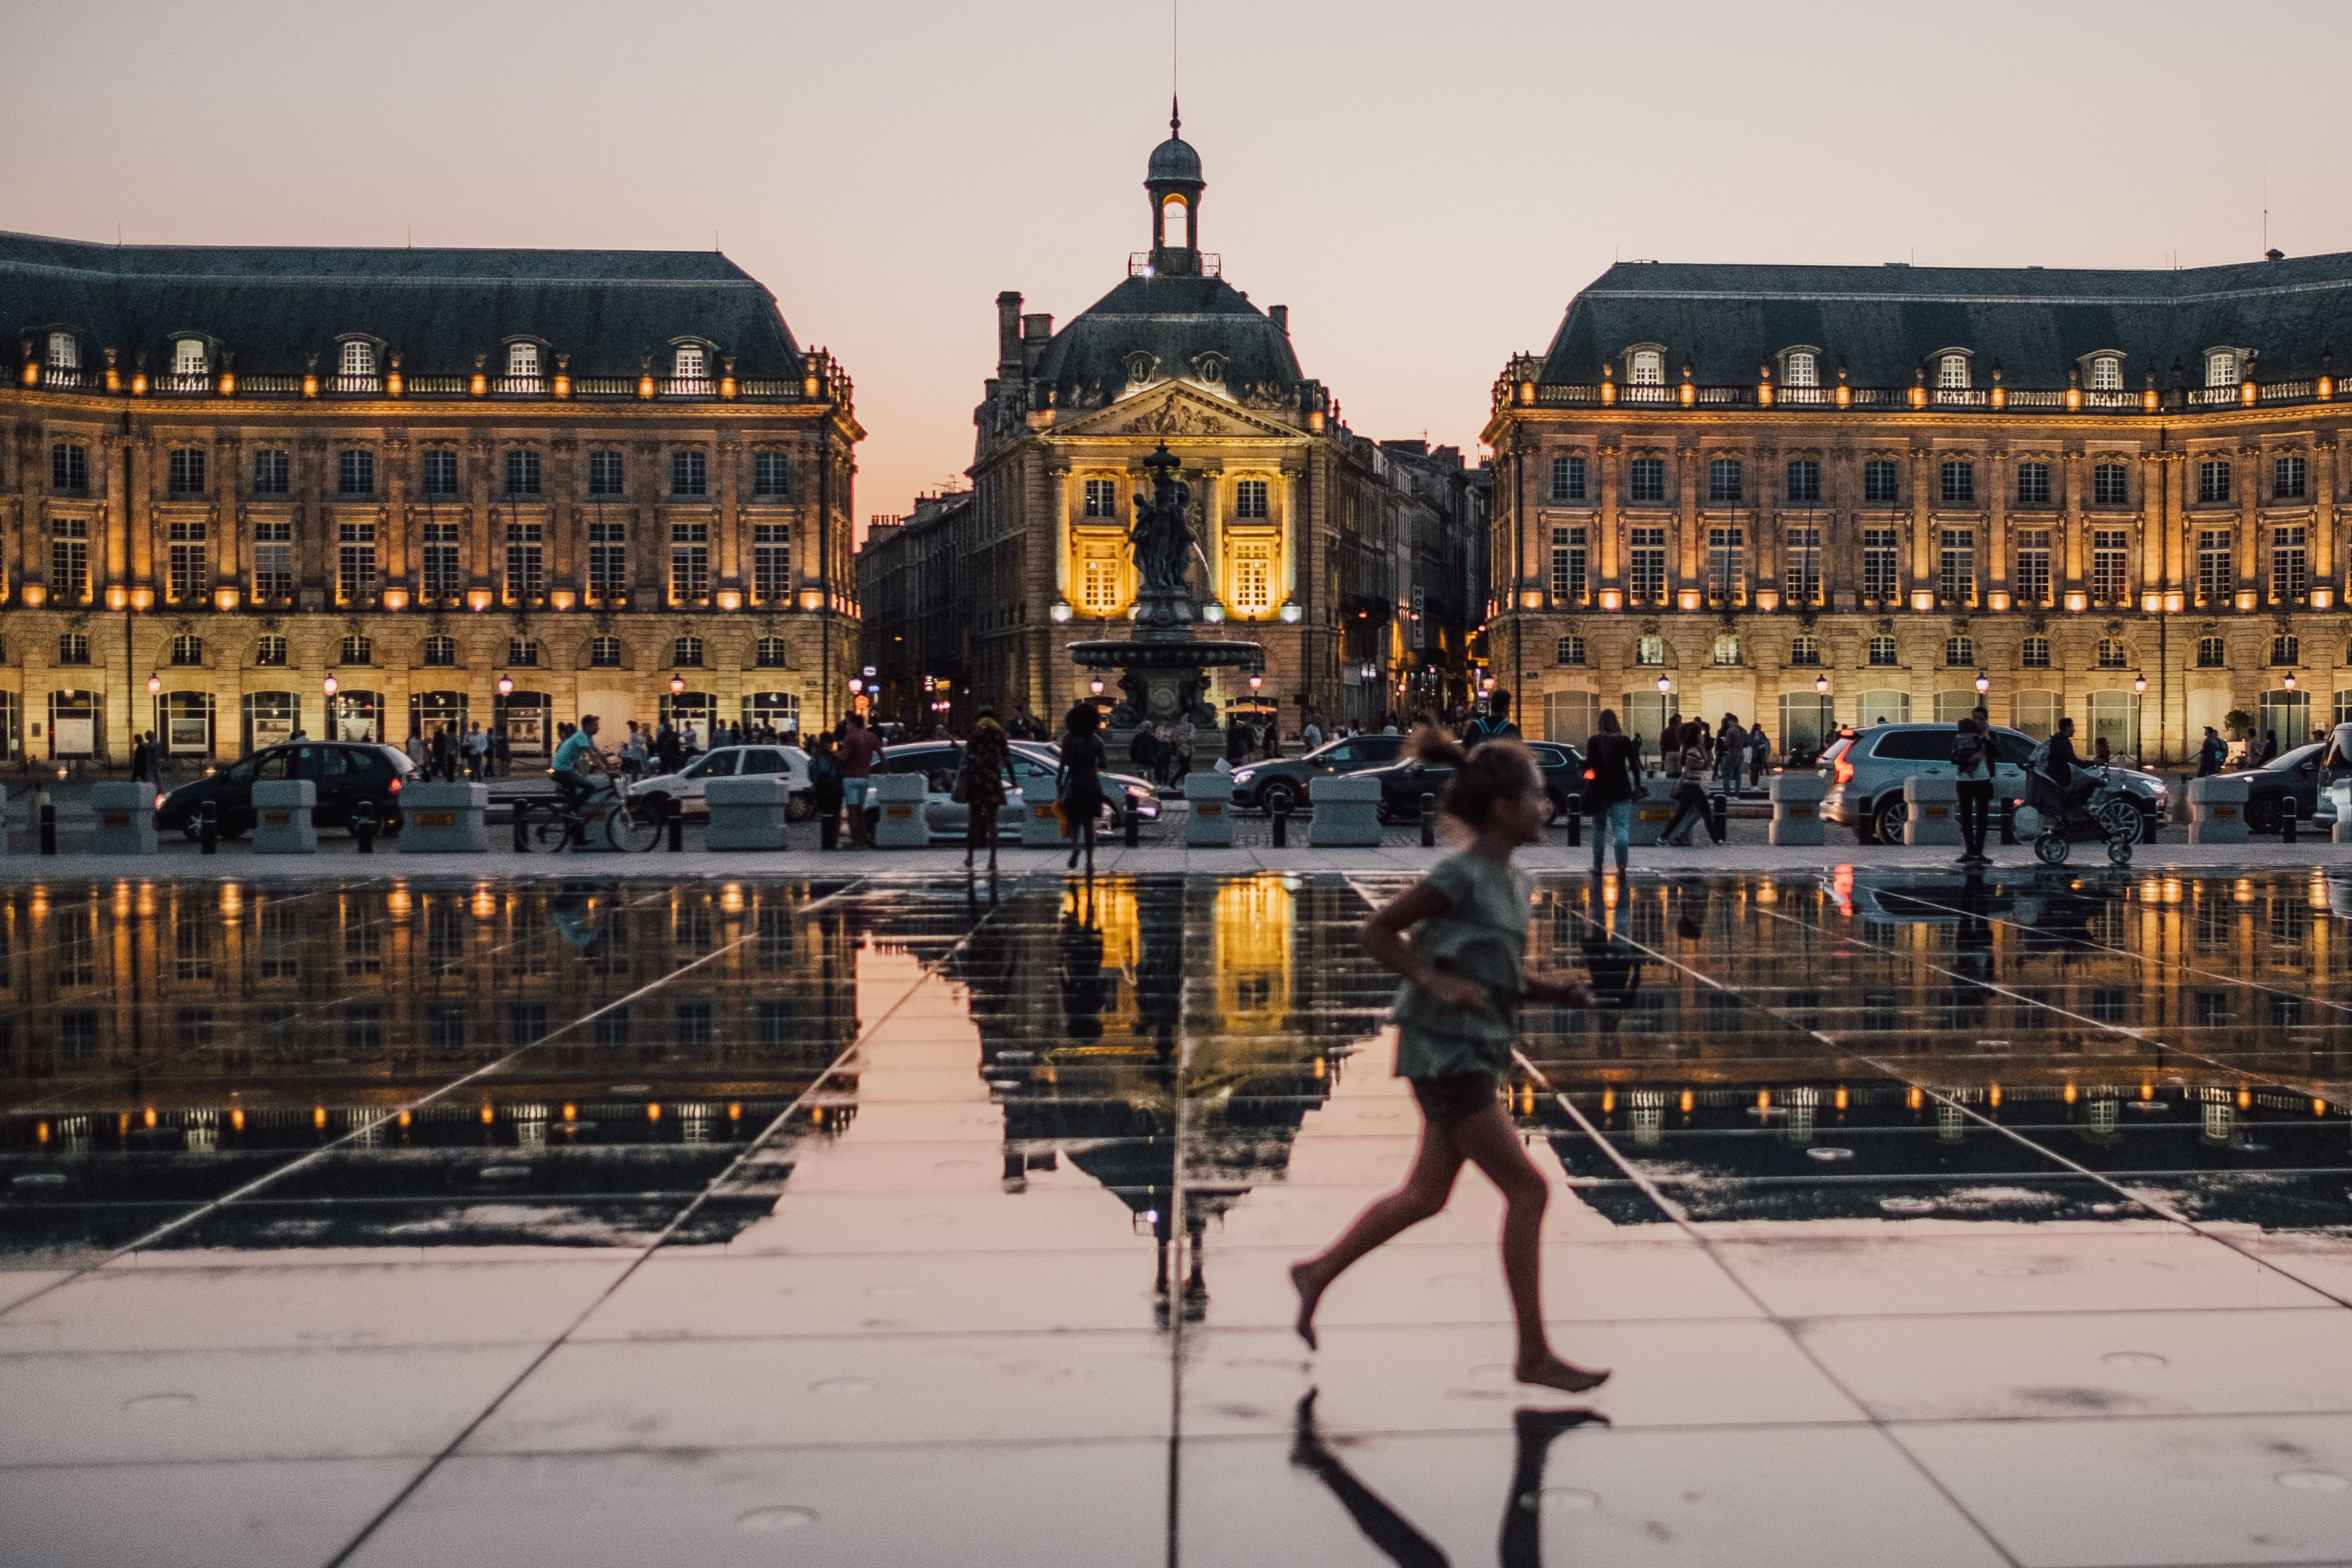 Image of lit up buildings in the city of Bordeaux in France. It is night time and the floor is showing a beautiful mirror image of the buildings.